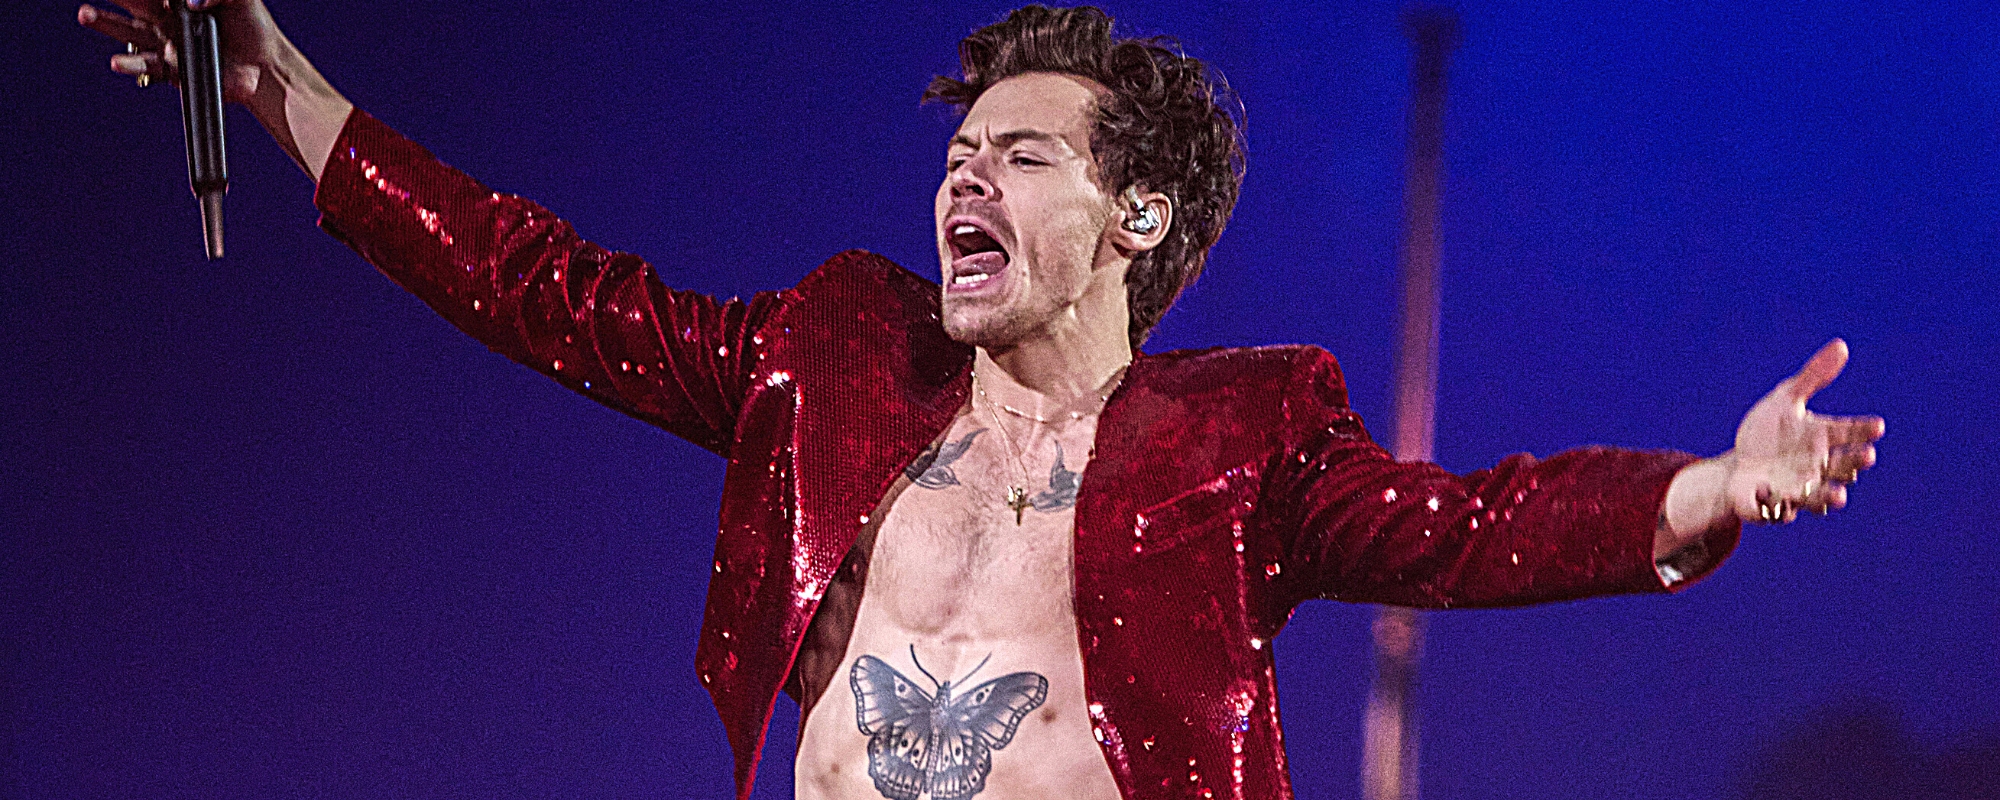 Harry Styles Special Las Vegas Show in the Works, “Would Undoubtedly Sell Out in Minutes”